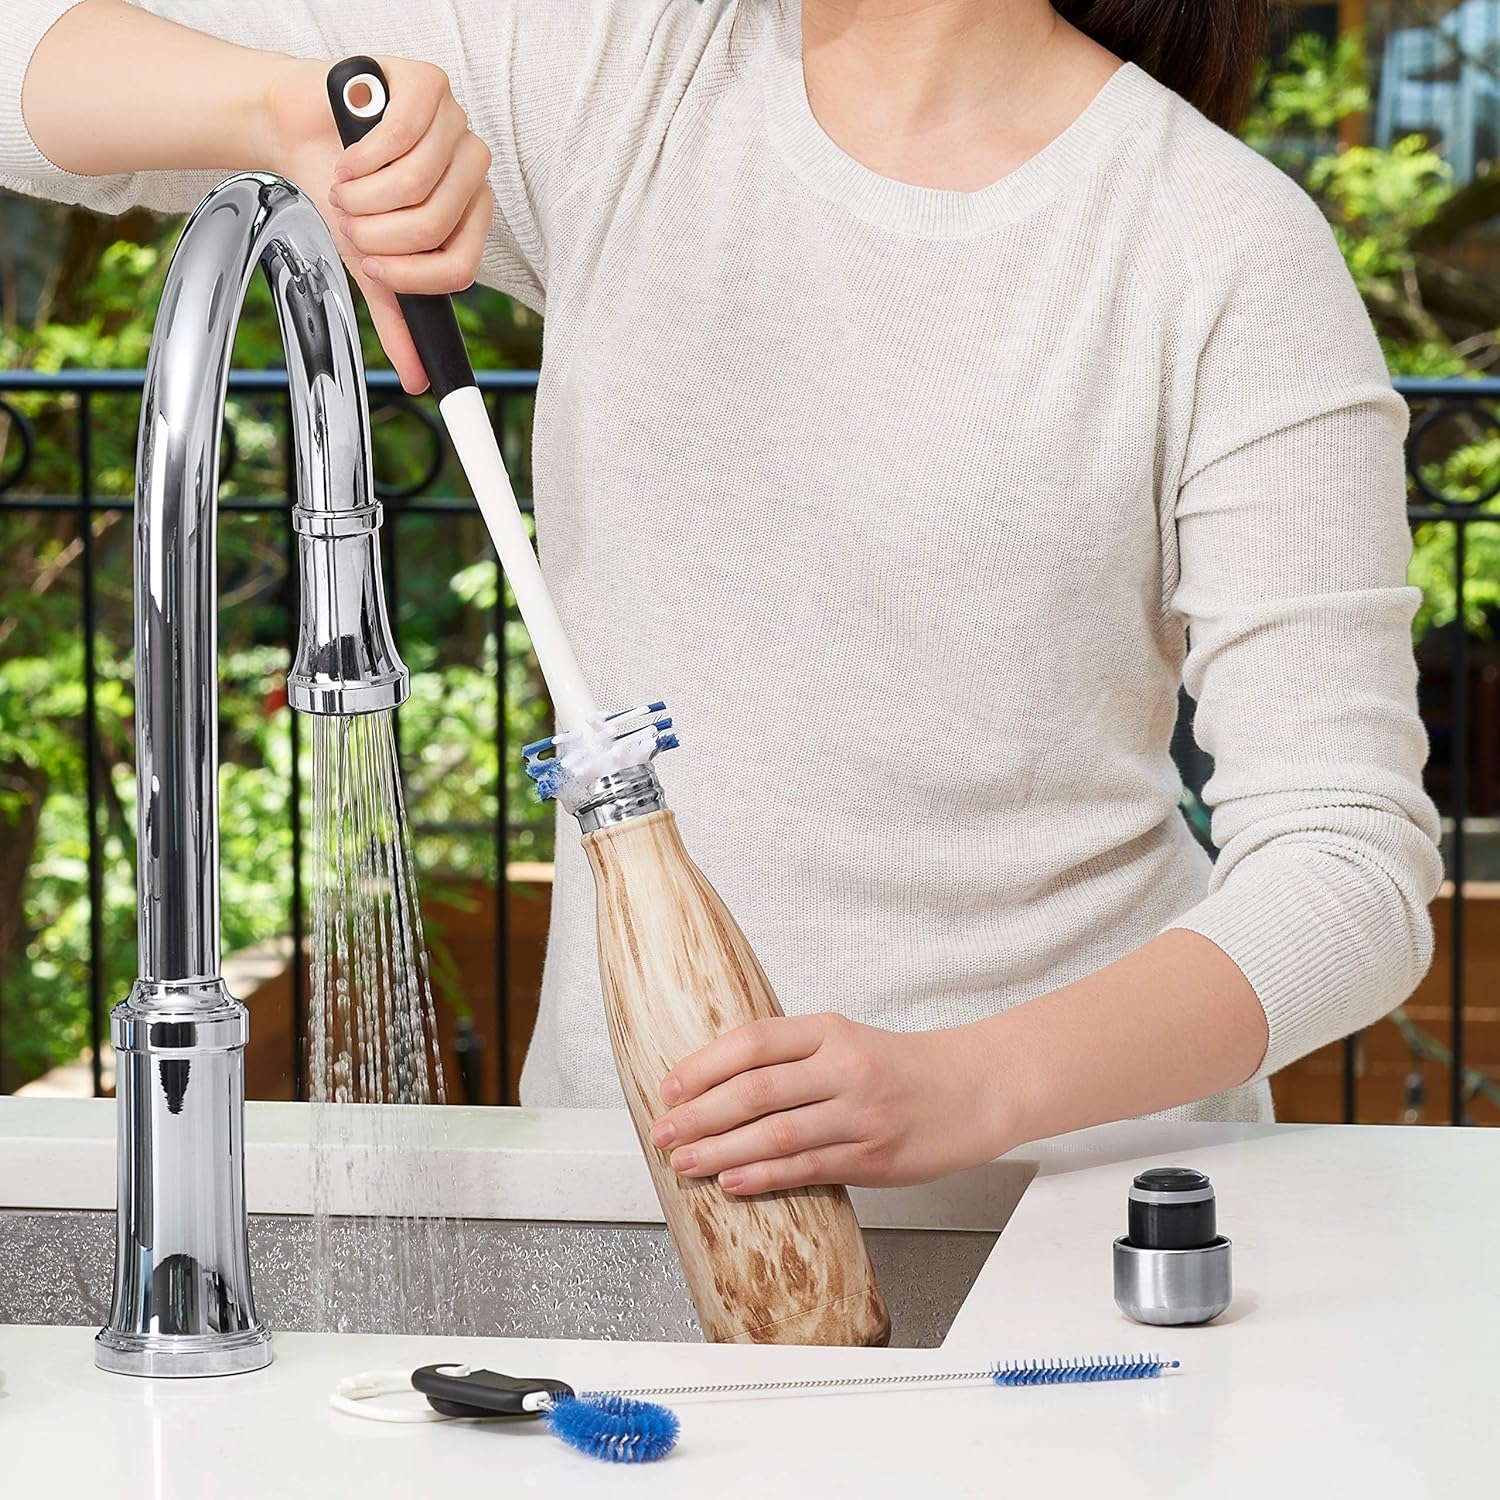 brush being used to scrub a water bottle in a sink